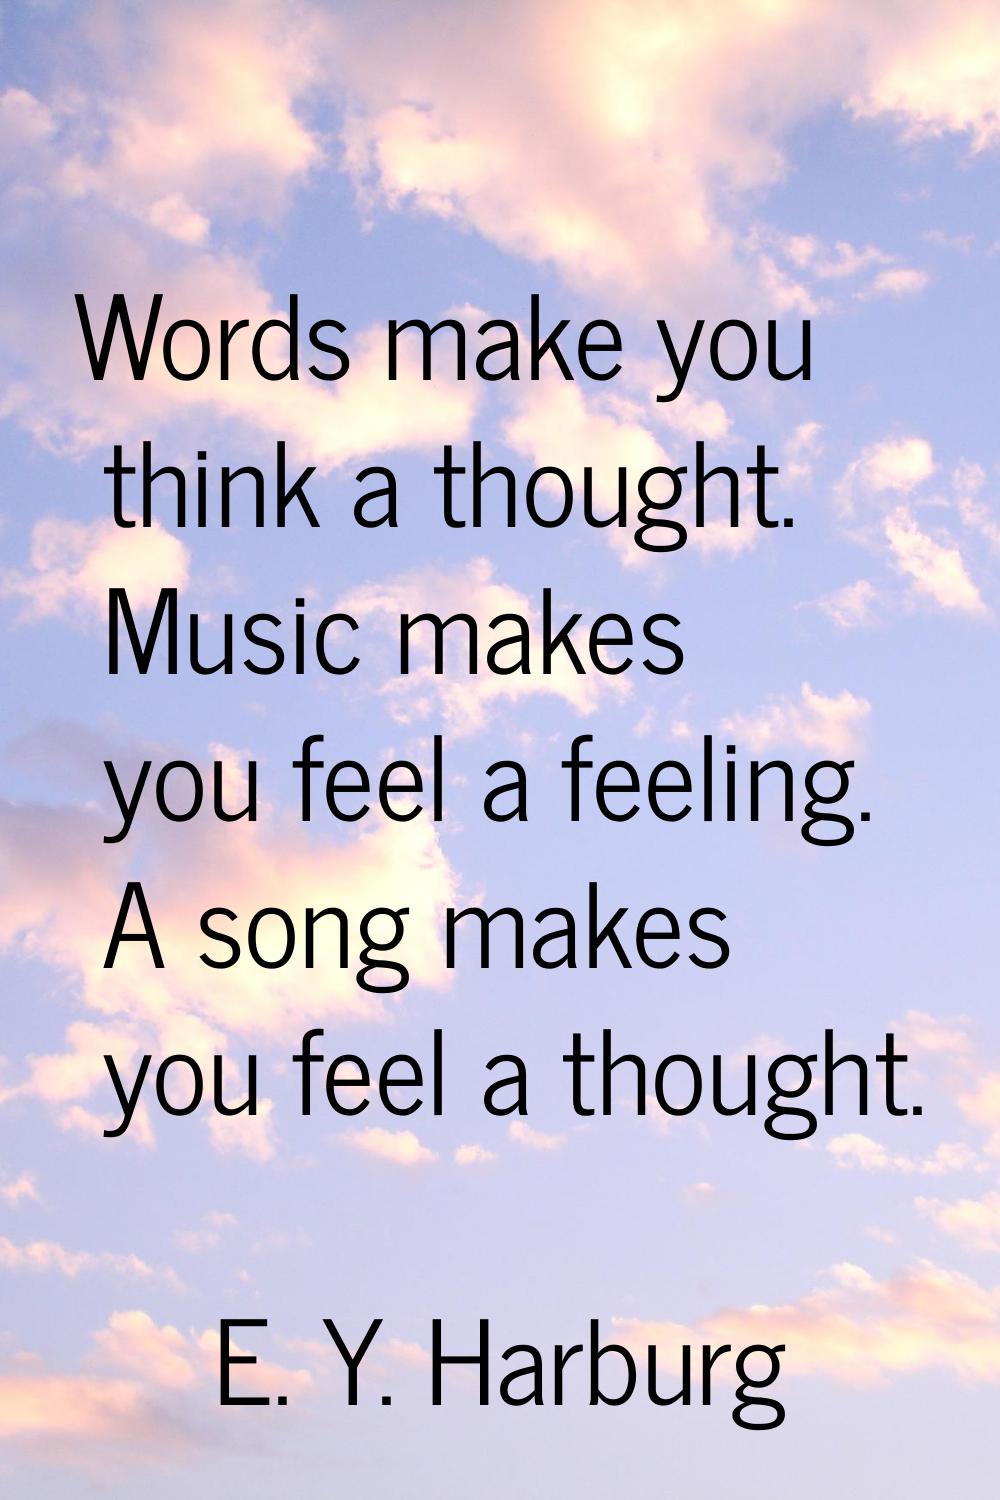 Words make you think a thought. Music makes you feel a feeling. A song makes you feel a thought.